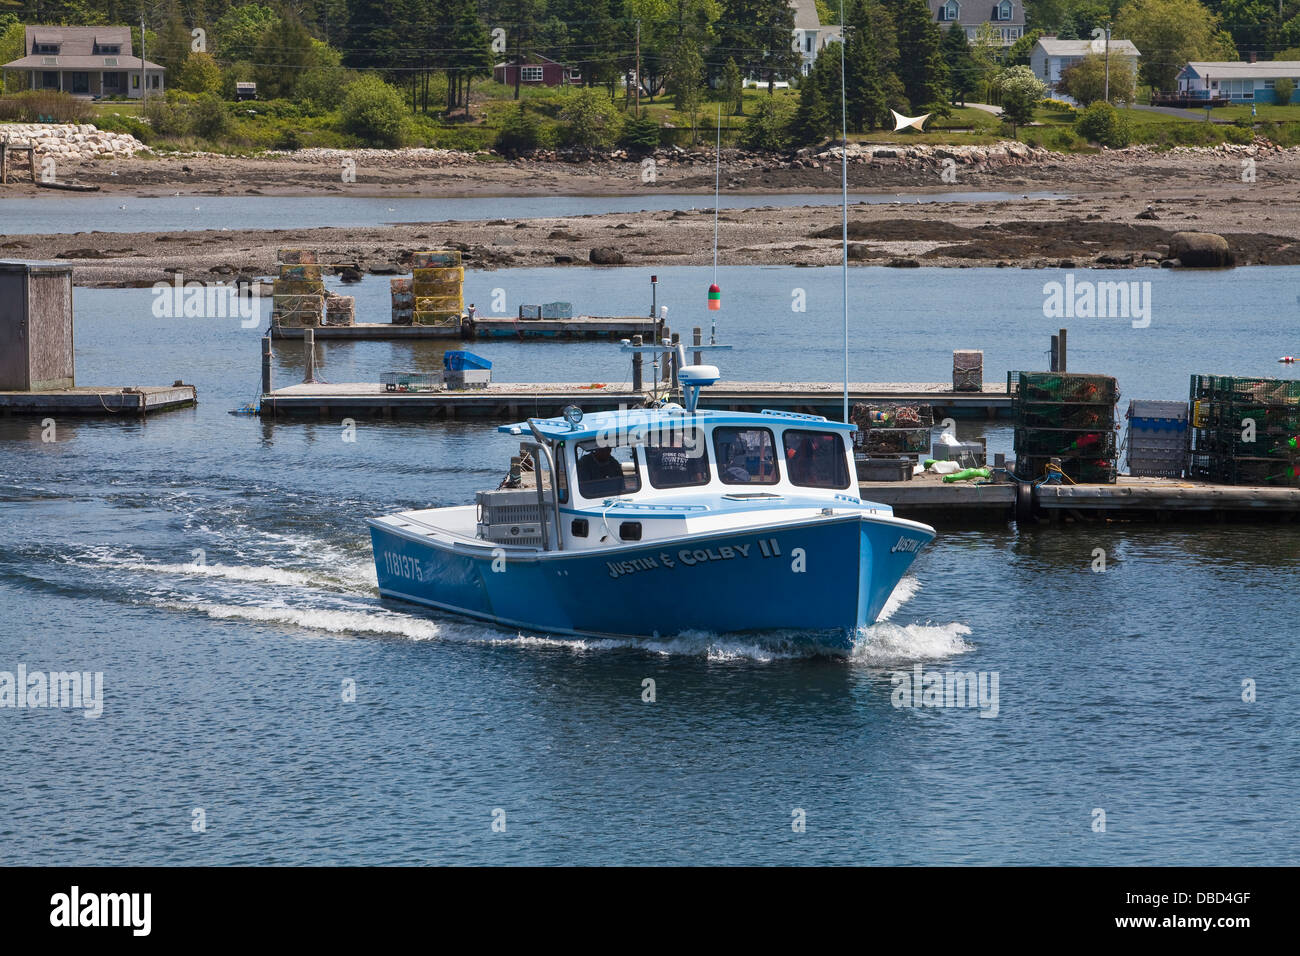 Fishing vessels are pictured in the harbor of Tremont, Maine Stock Photo